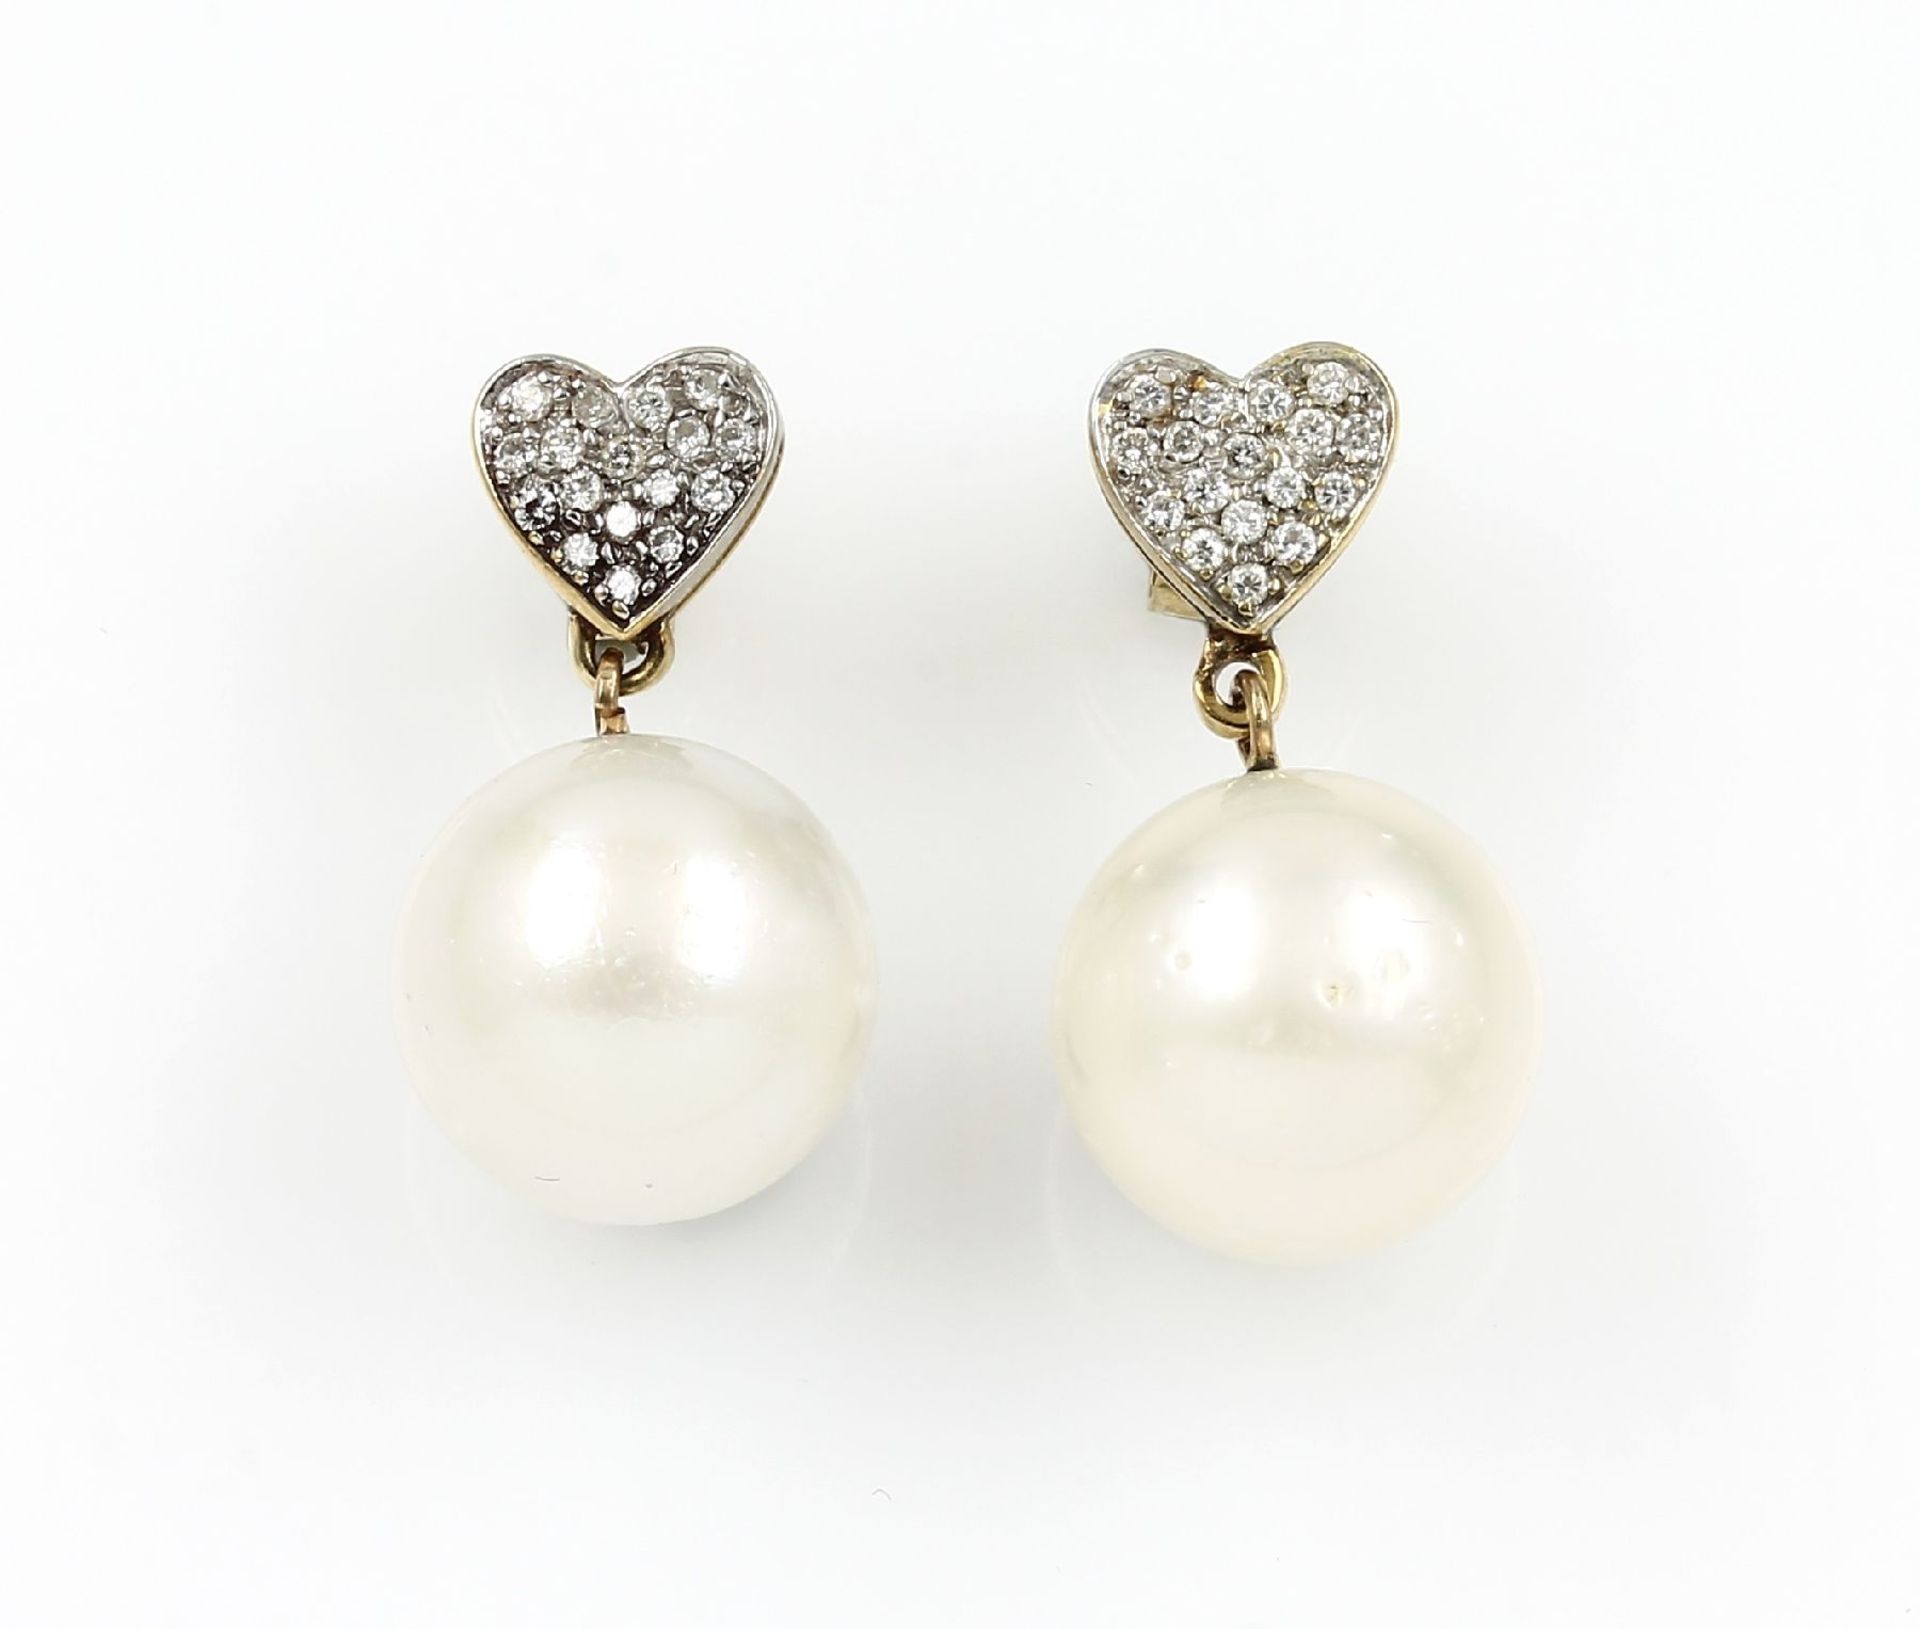 Pair of 14 kt gold earrings with south seas pearls and brilliants , YG/WG 585/000, 2 cultured